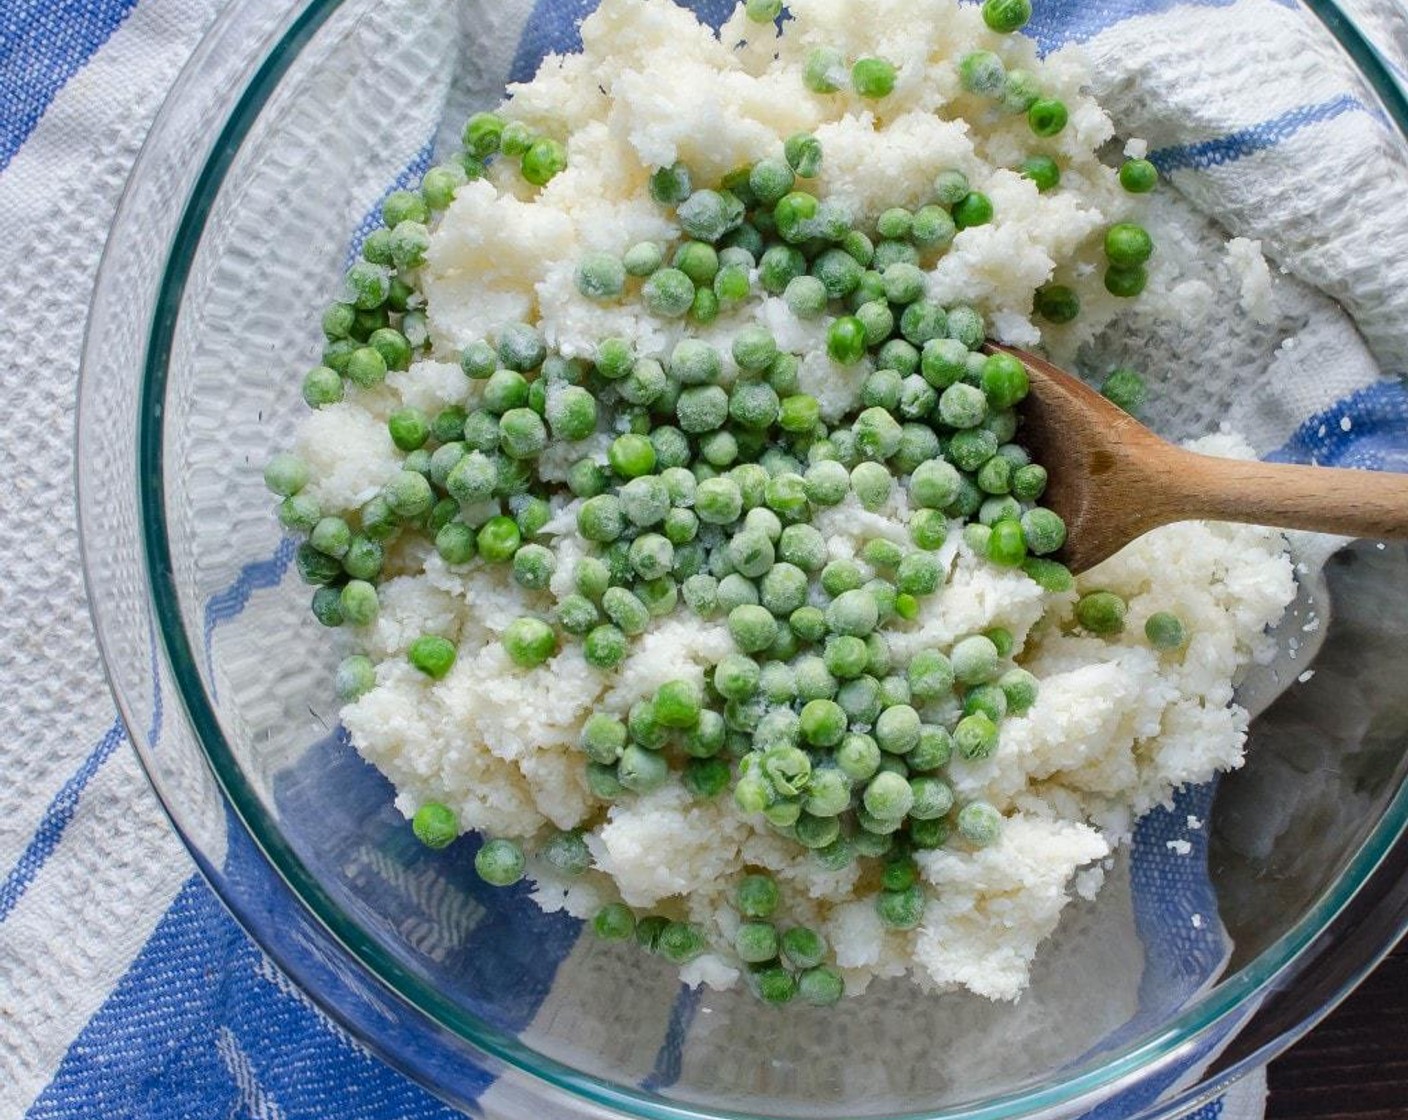 step 2 Transfer the cauliflower to a bowl. Add the Olive Oil (1 1/2 Tbsp), Garlic (1 clove) and Frozen Green Peas (1 cup). Toss to coat and cover tightly with plastic wrap. Microwave for 3 minutes on high power.